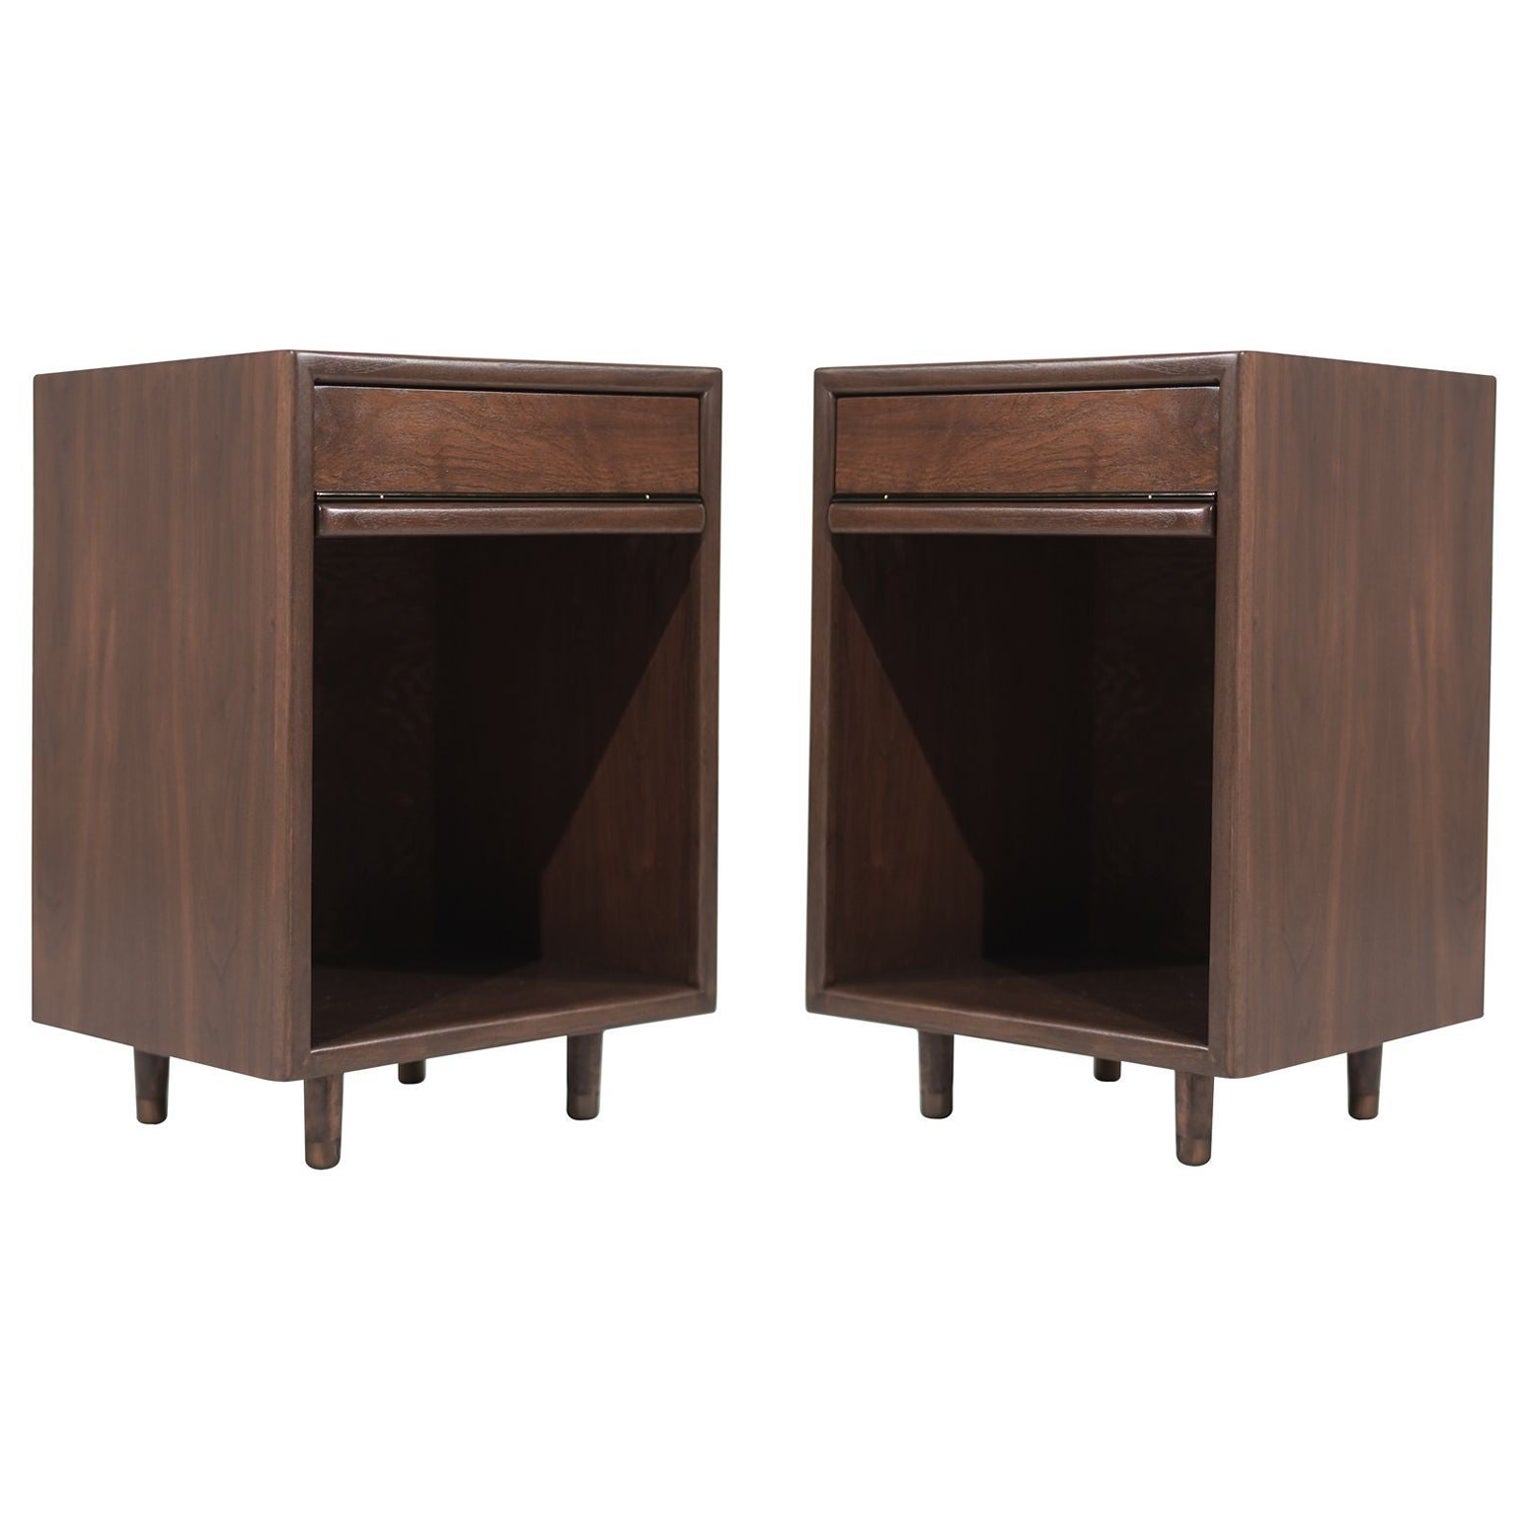 Set of Minimalist Walnut End Tables, C. 1950s For Sale